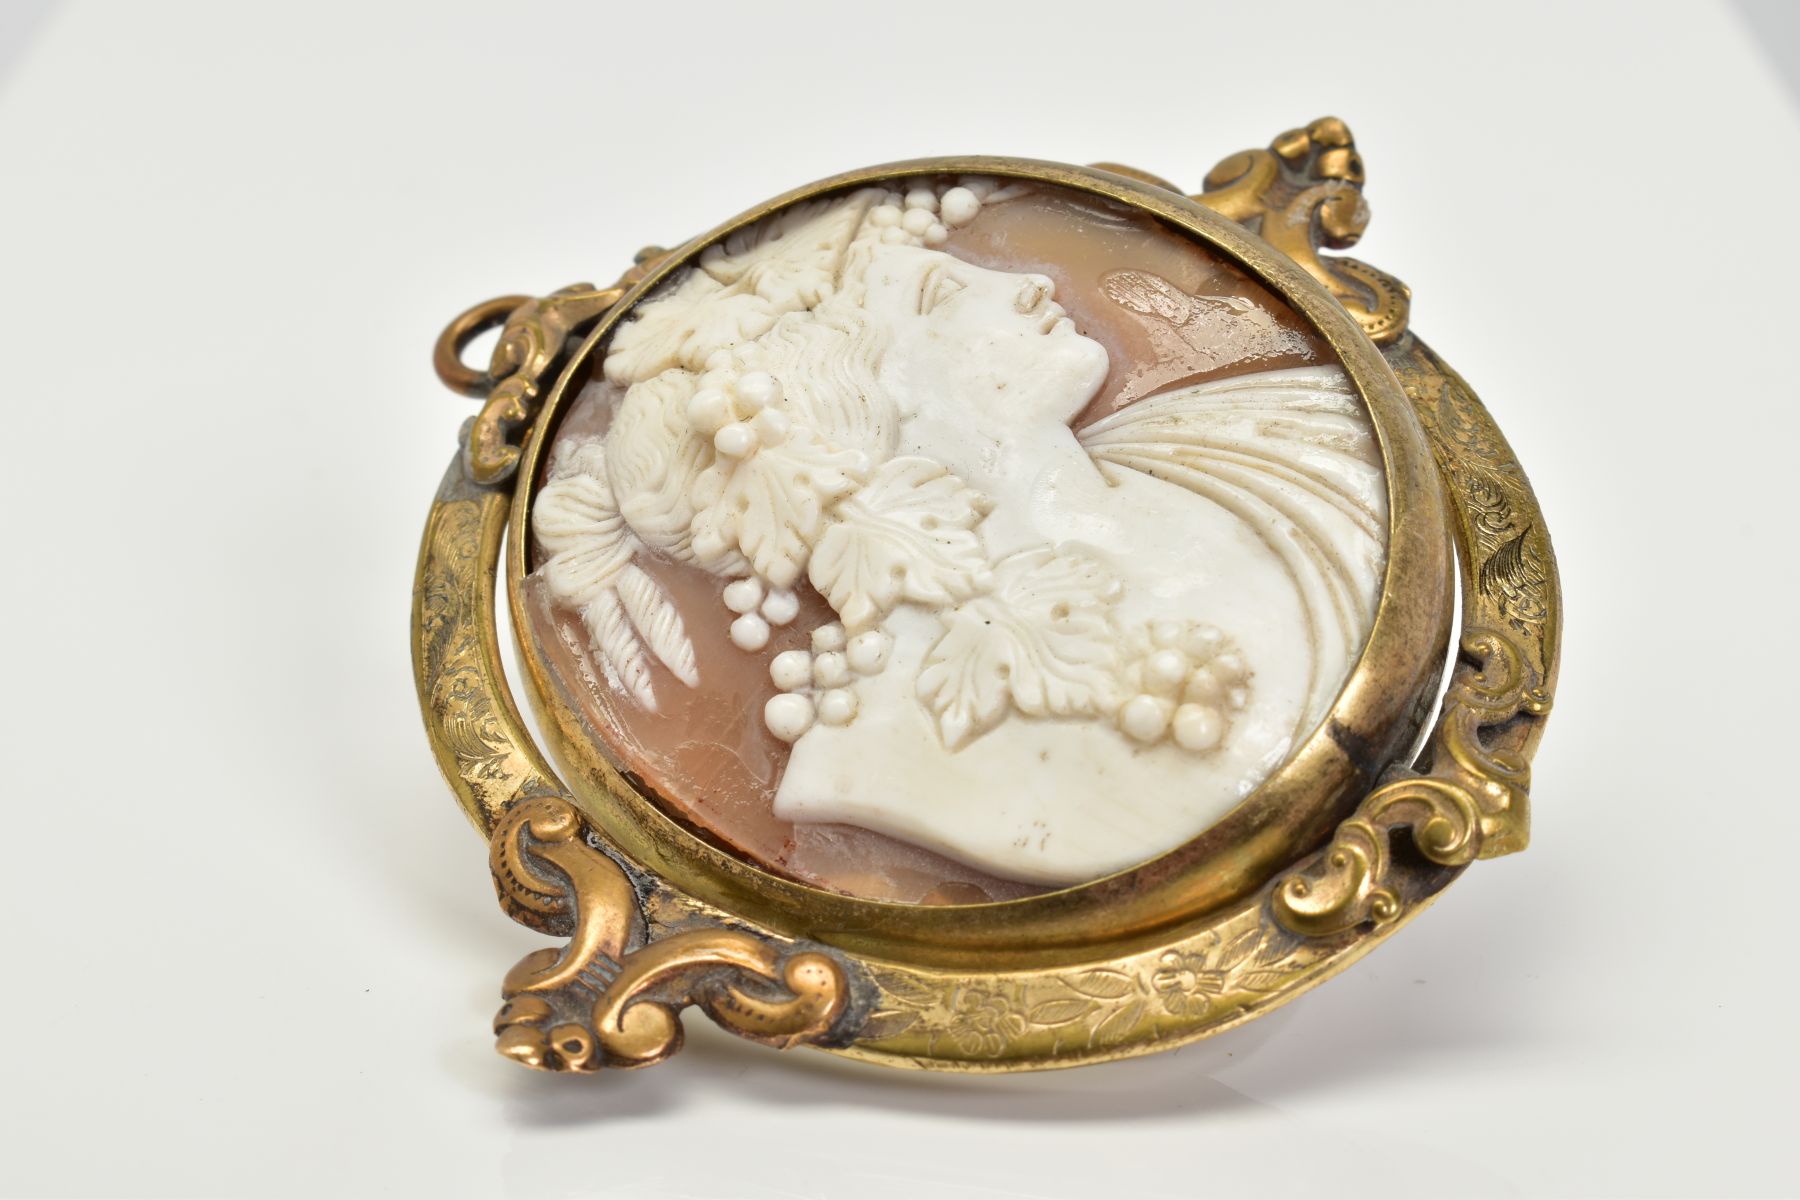 A YELLOW METAL SWIVEL MEMORIAL CAMEO PENDANT, the oval cameo panel depicting a lady in profile - Image 2 of 4